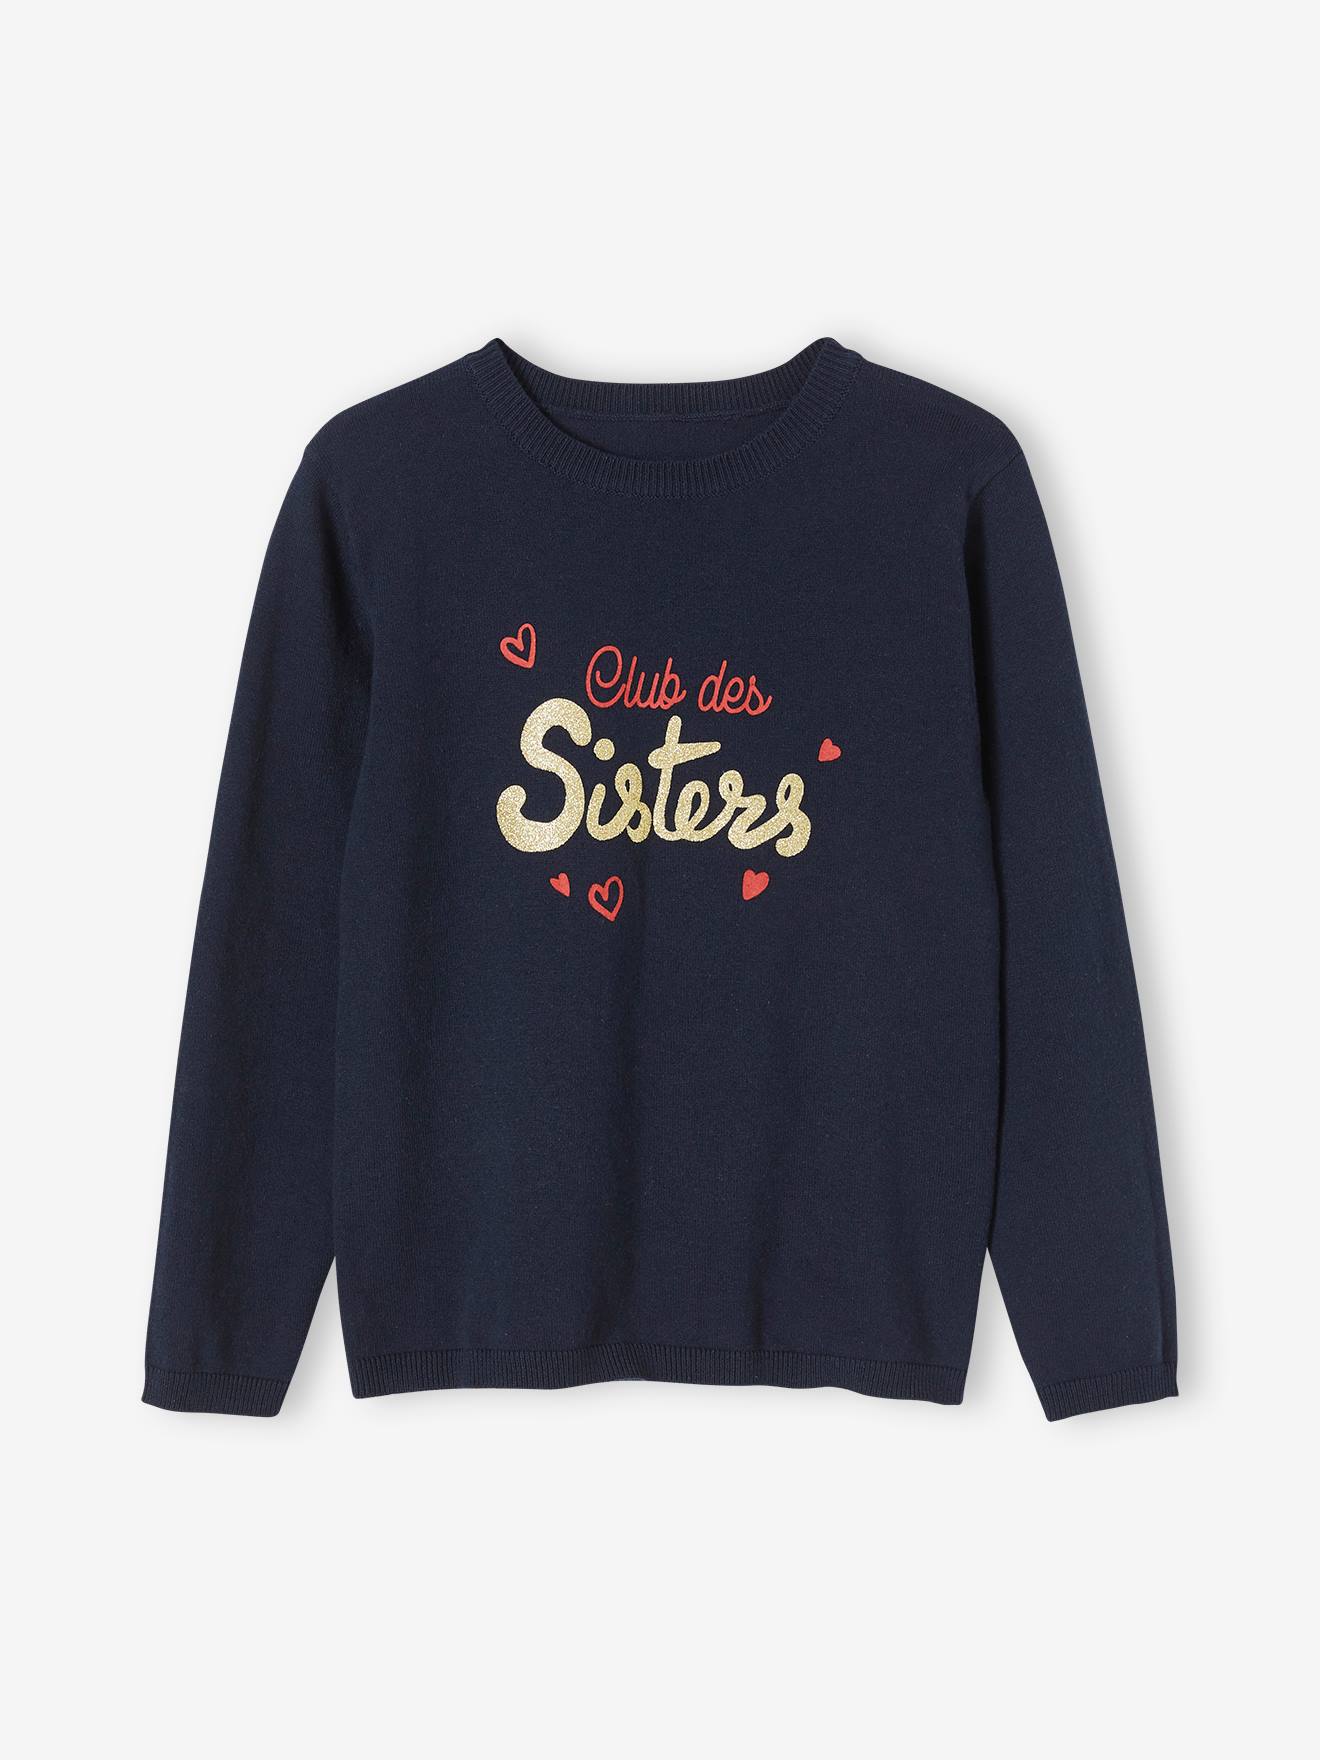 Top with Message & Iridescent Inscription in Relief, for Girls blue medium solid with design